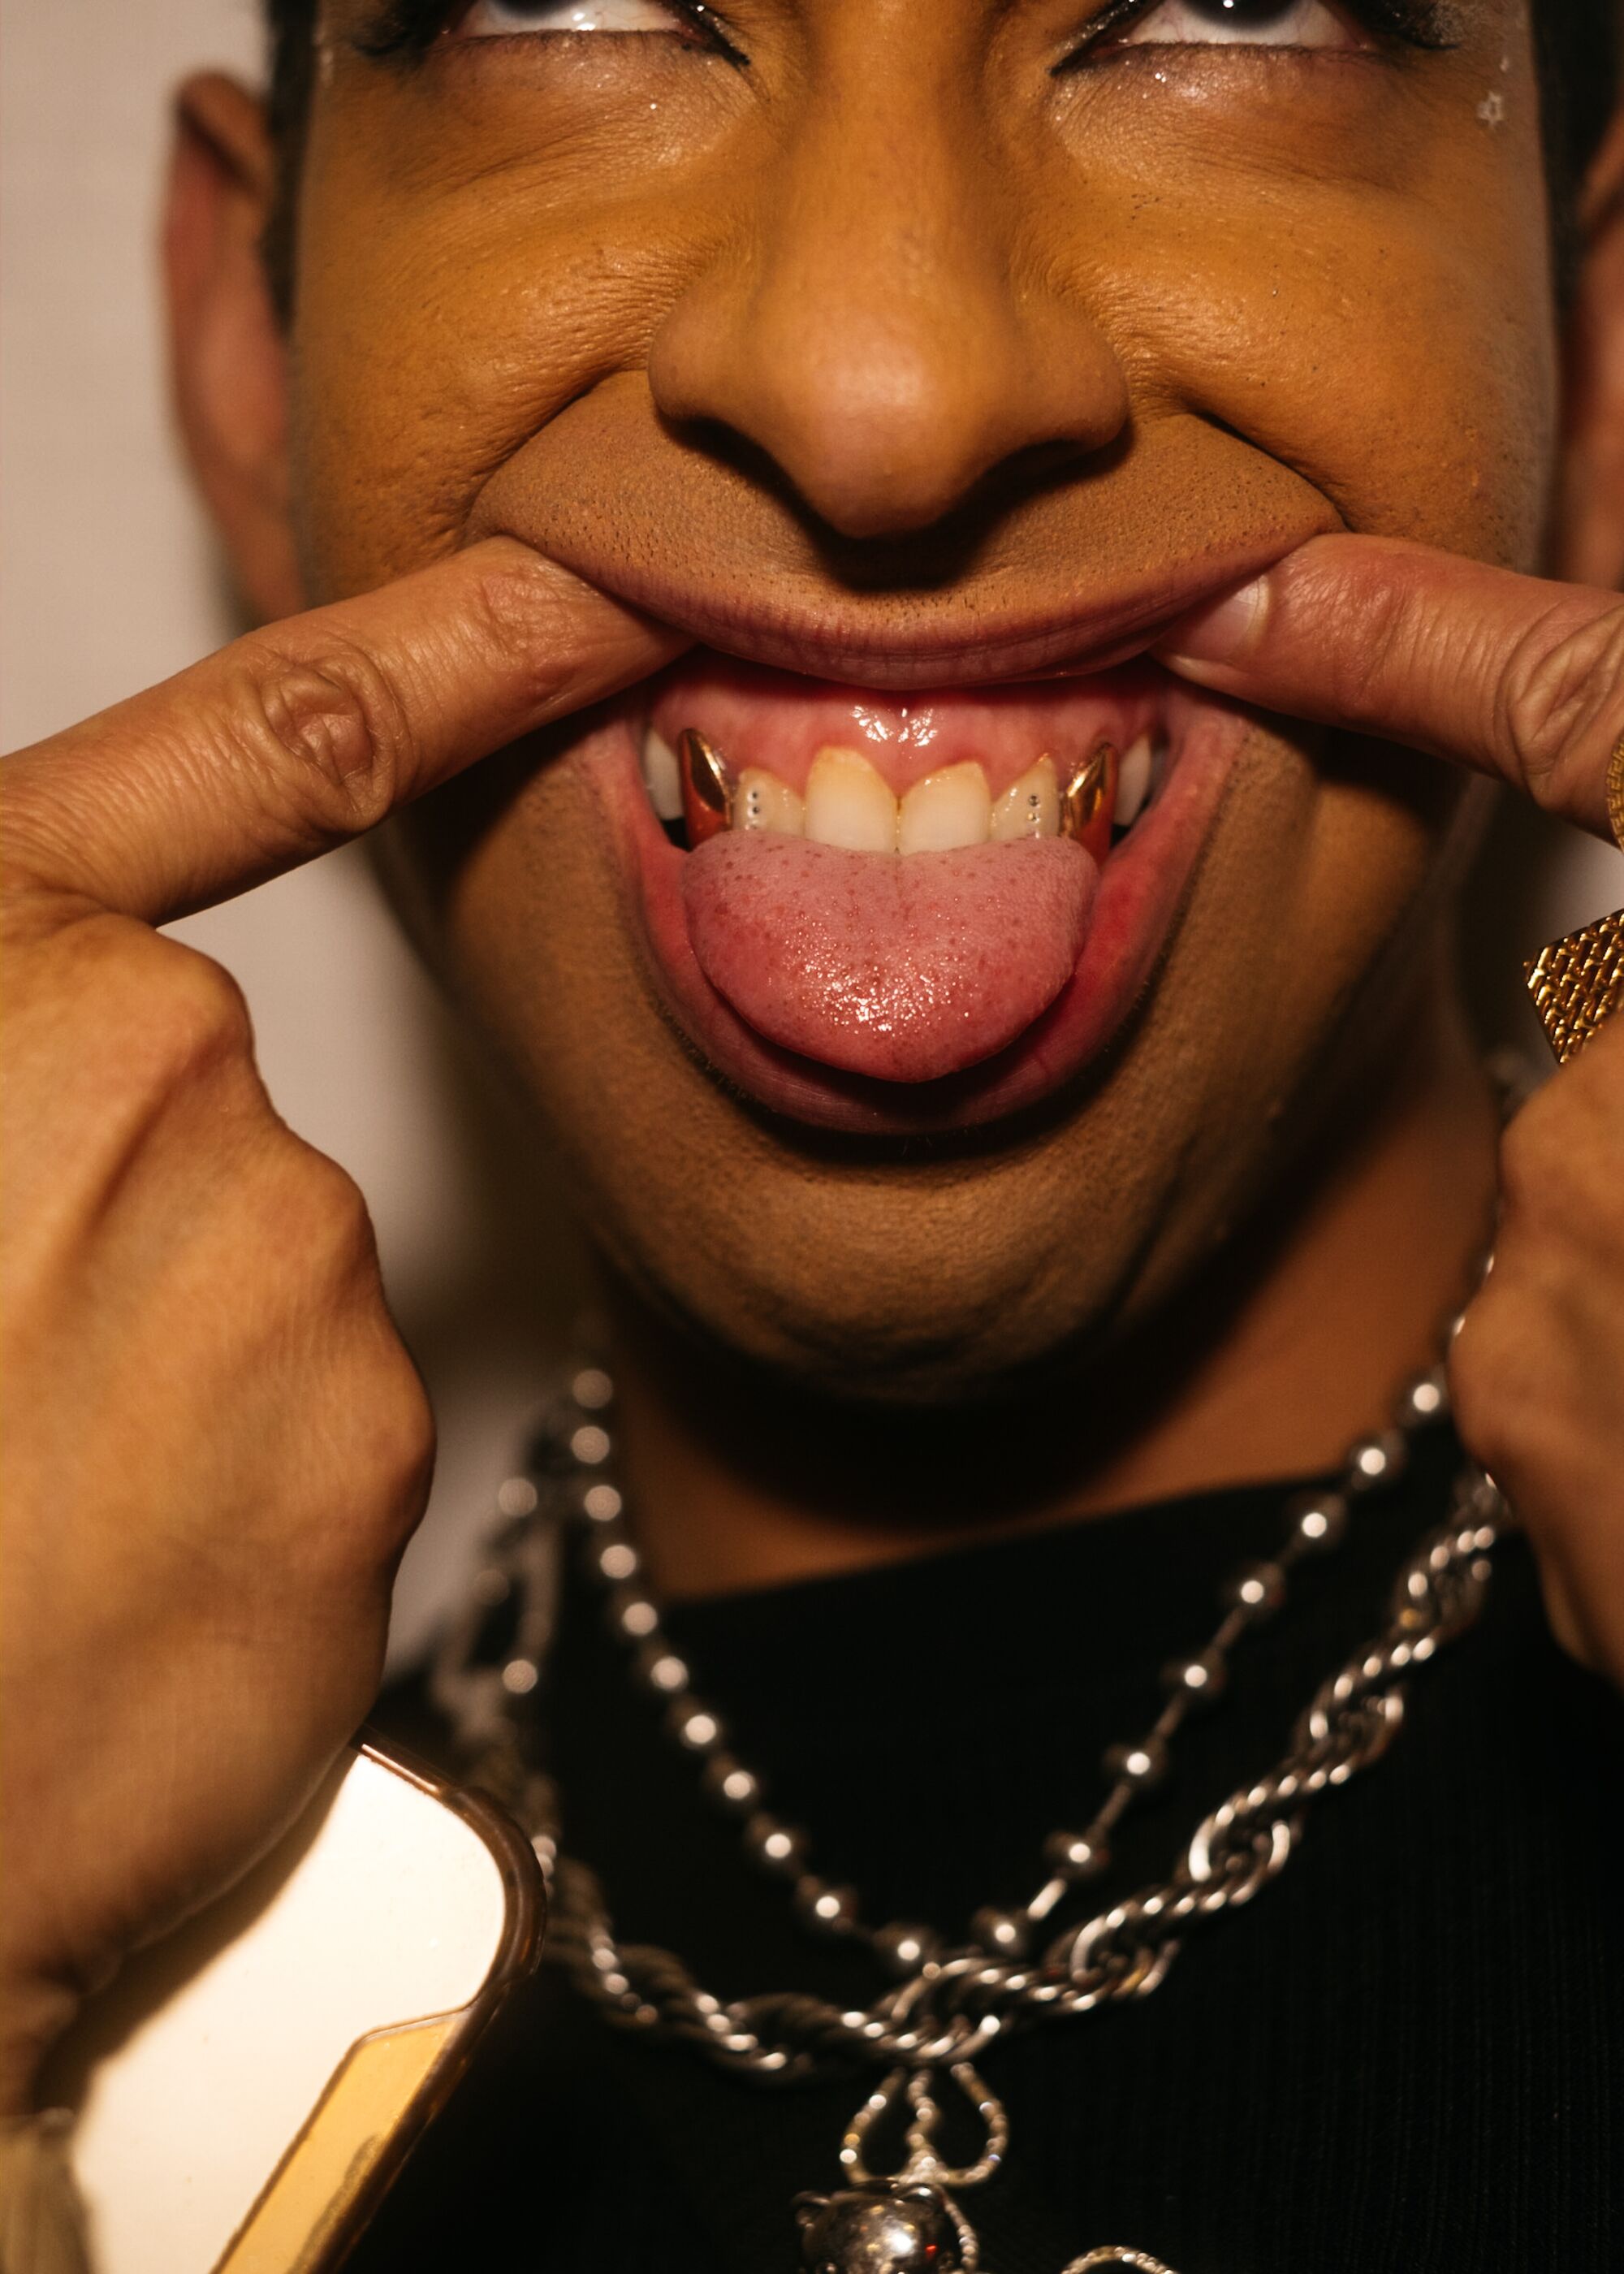 A Heav3n attendee shows off their bedazzled teeth.